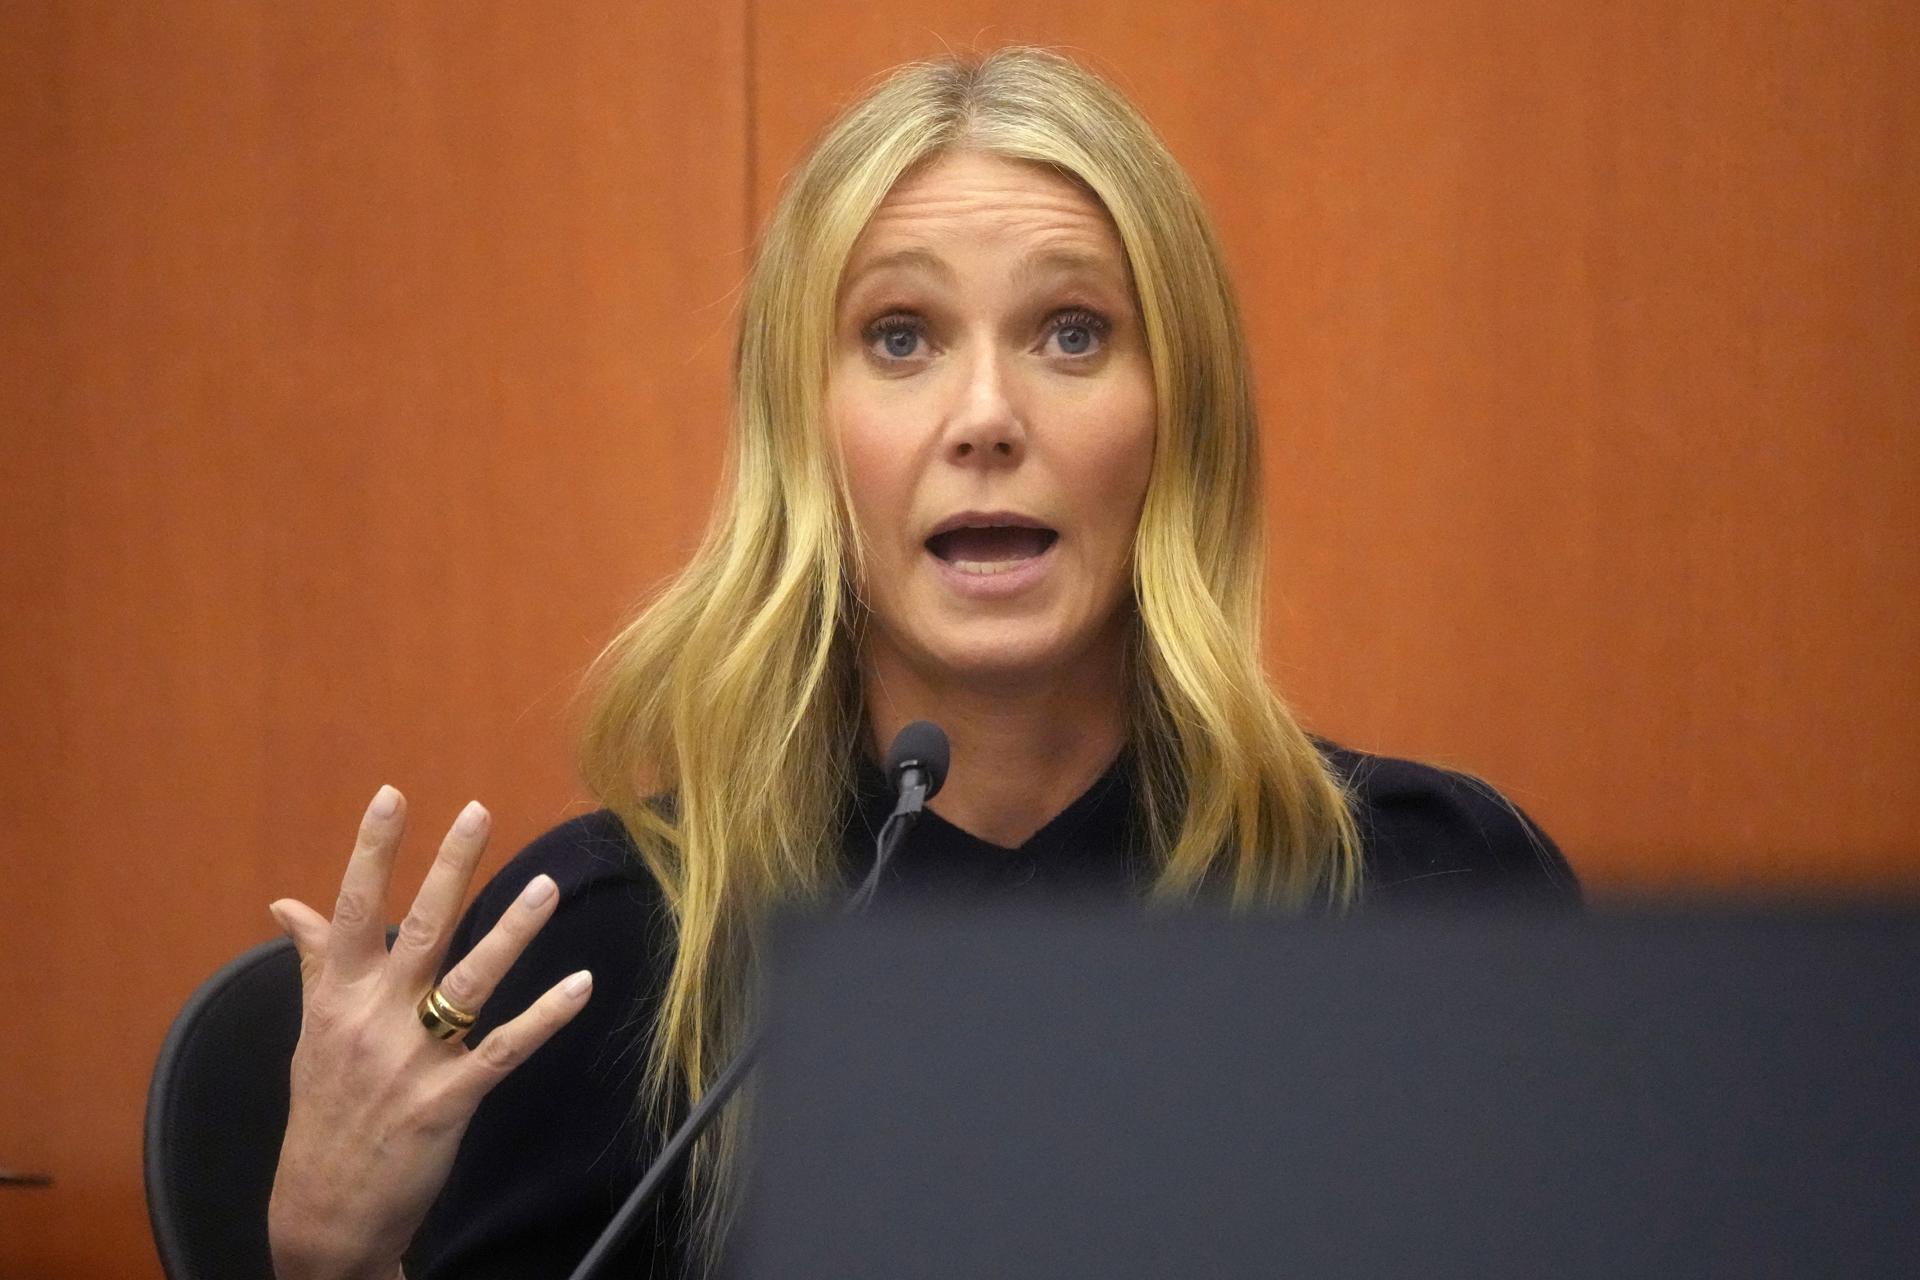 PGwyneth Paltrow appears on the stand in court where she is accused in a lawsuit of crashing into a skier during a 2016 family ski vacation, leaving him with brain damage and four broken ribs, in Park City, Utah, USA, 24 March 2023. EFE/EPA/Rick Bowmer / POOL POOL